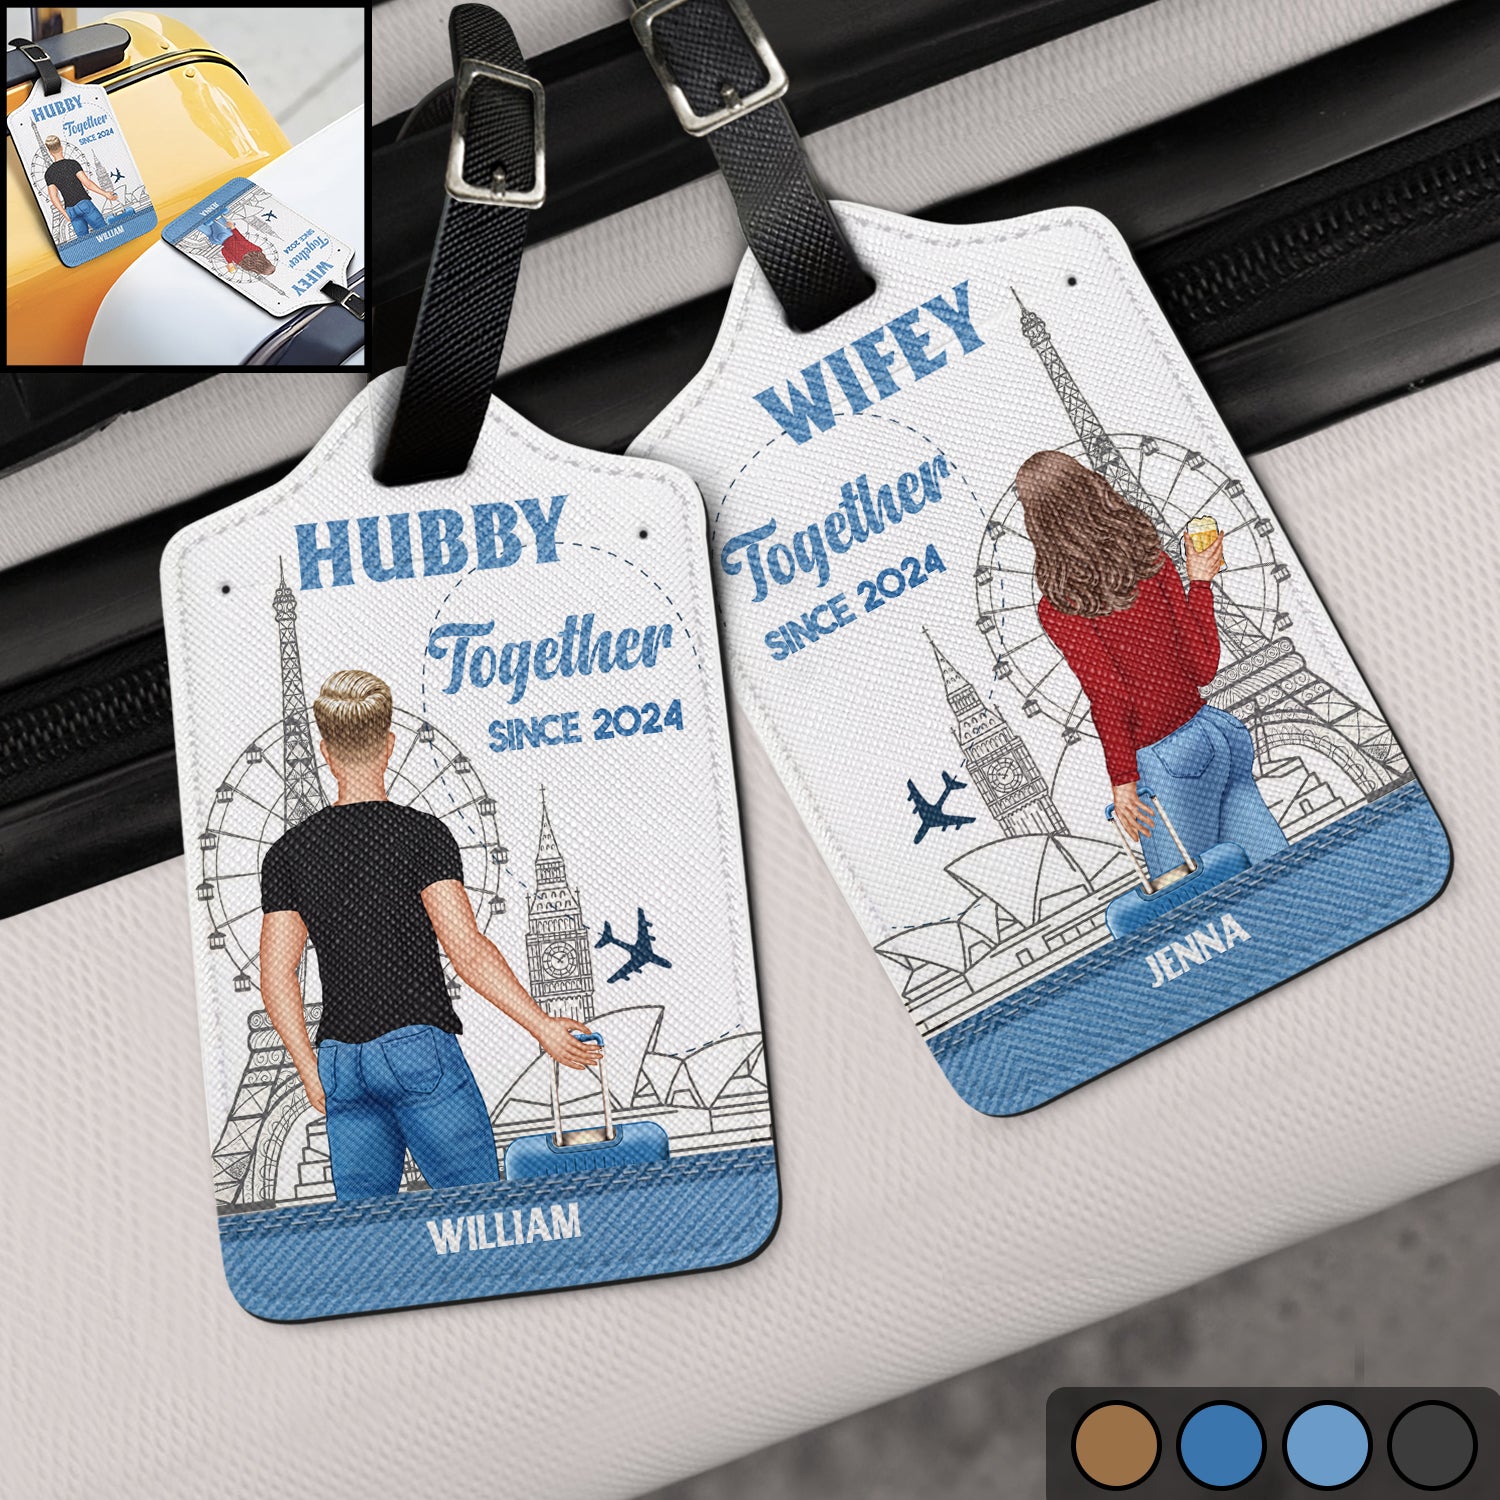 Traveling Couple Hubby & Wifey Together Since - Gift For Couples, Traveling Gift - Personalized Combo 2 Luggage Tags